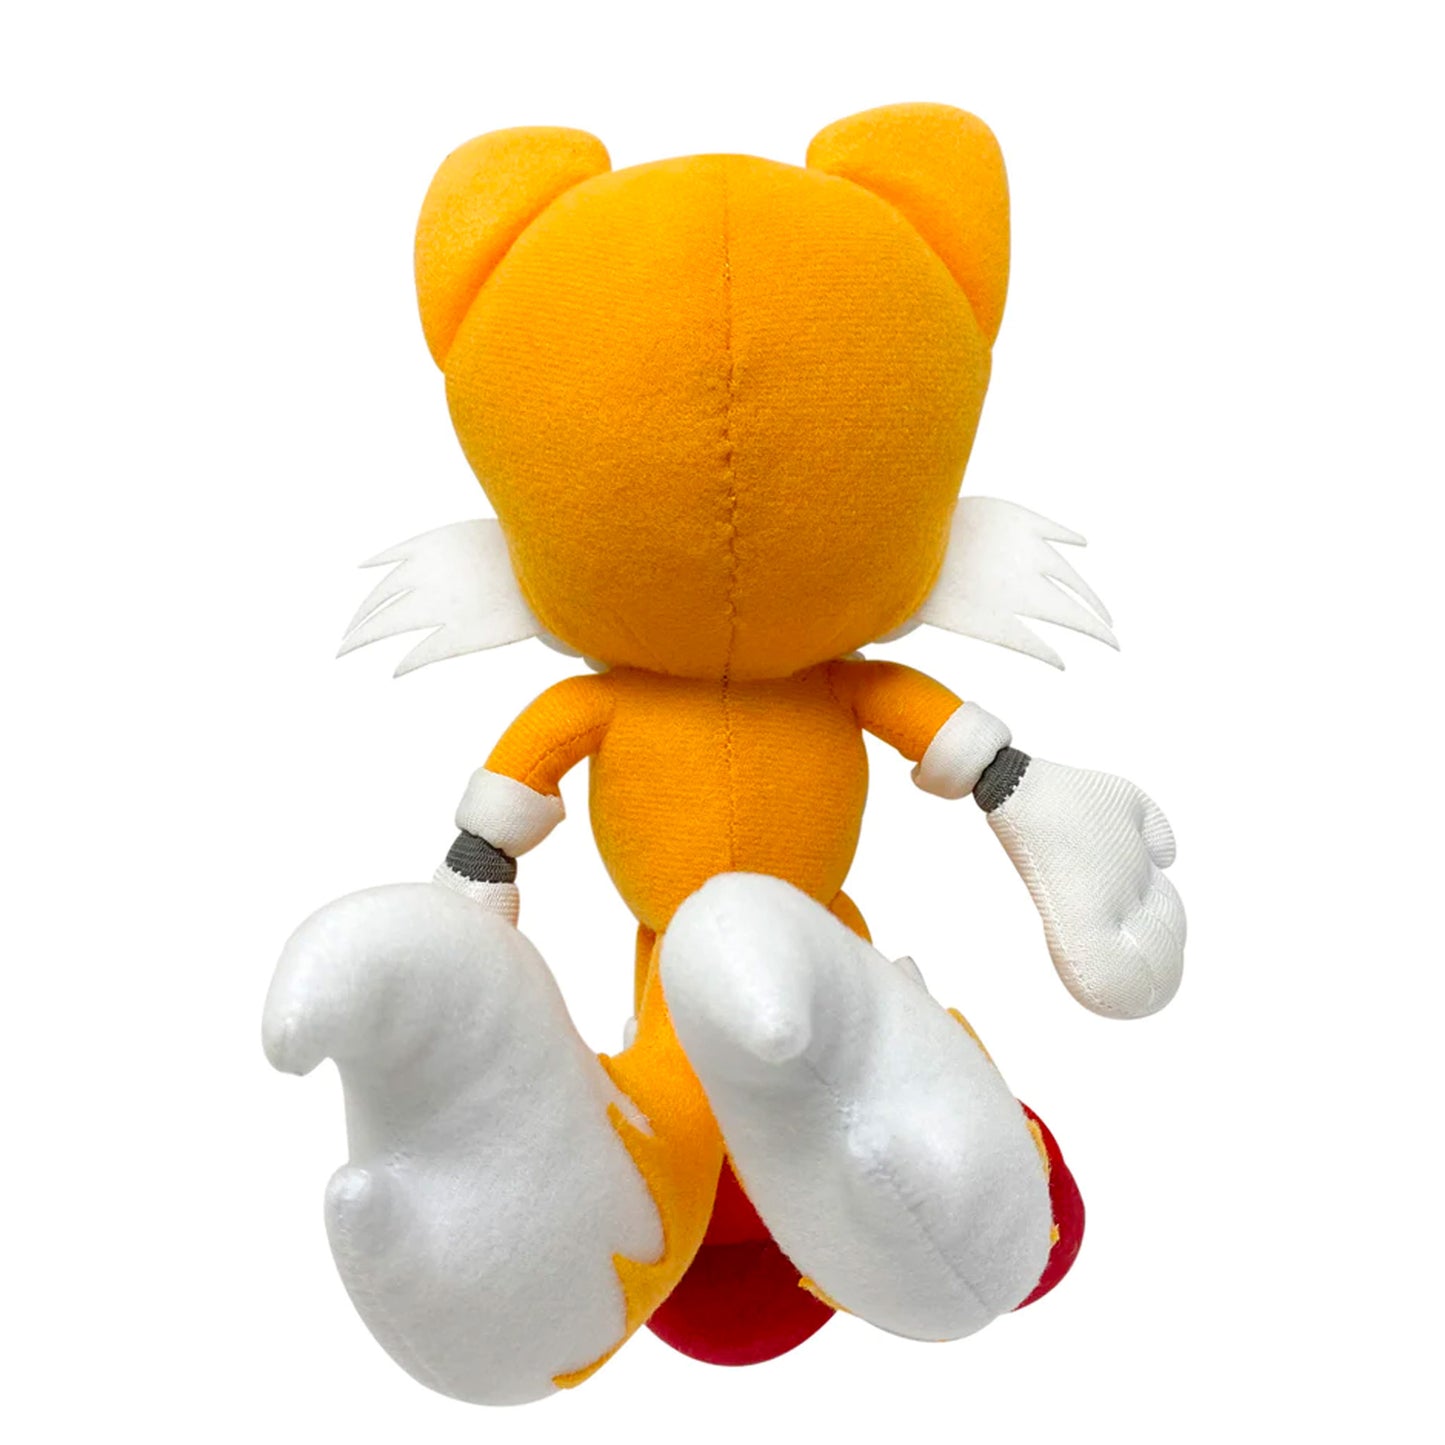 Sonic the Hedgehog Classic Tails Slippers